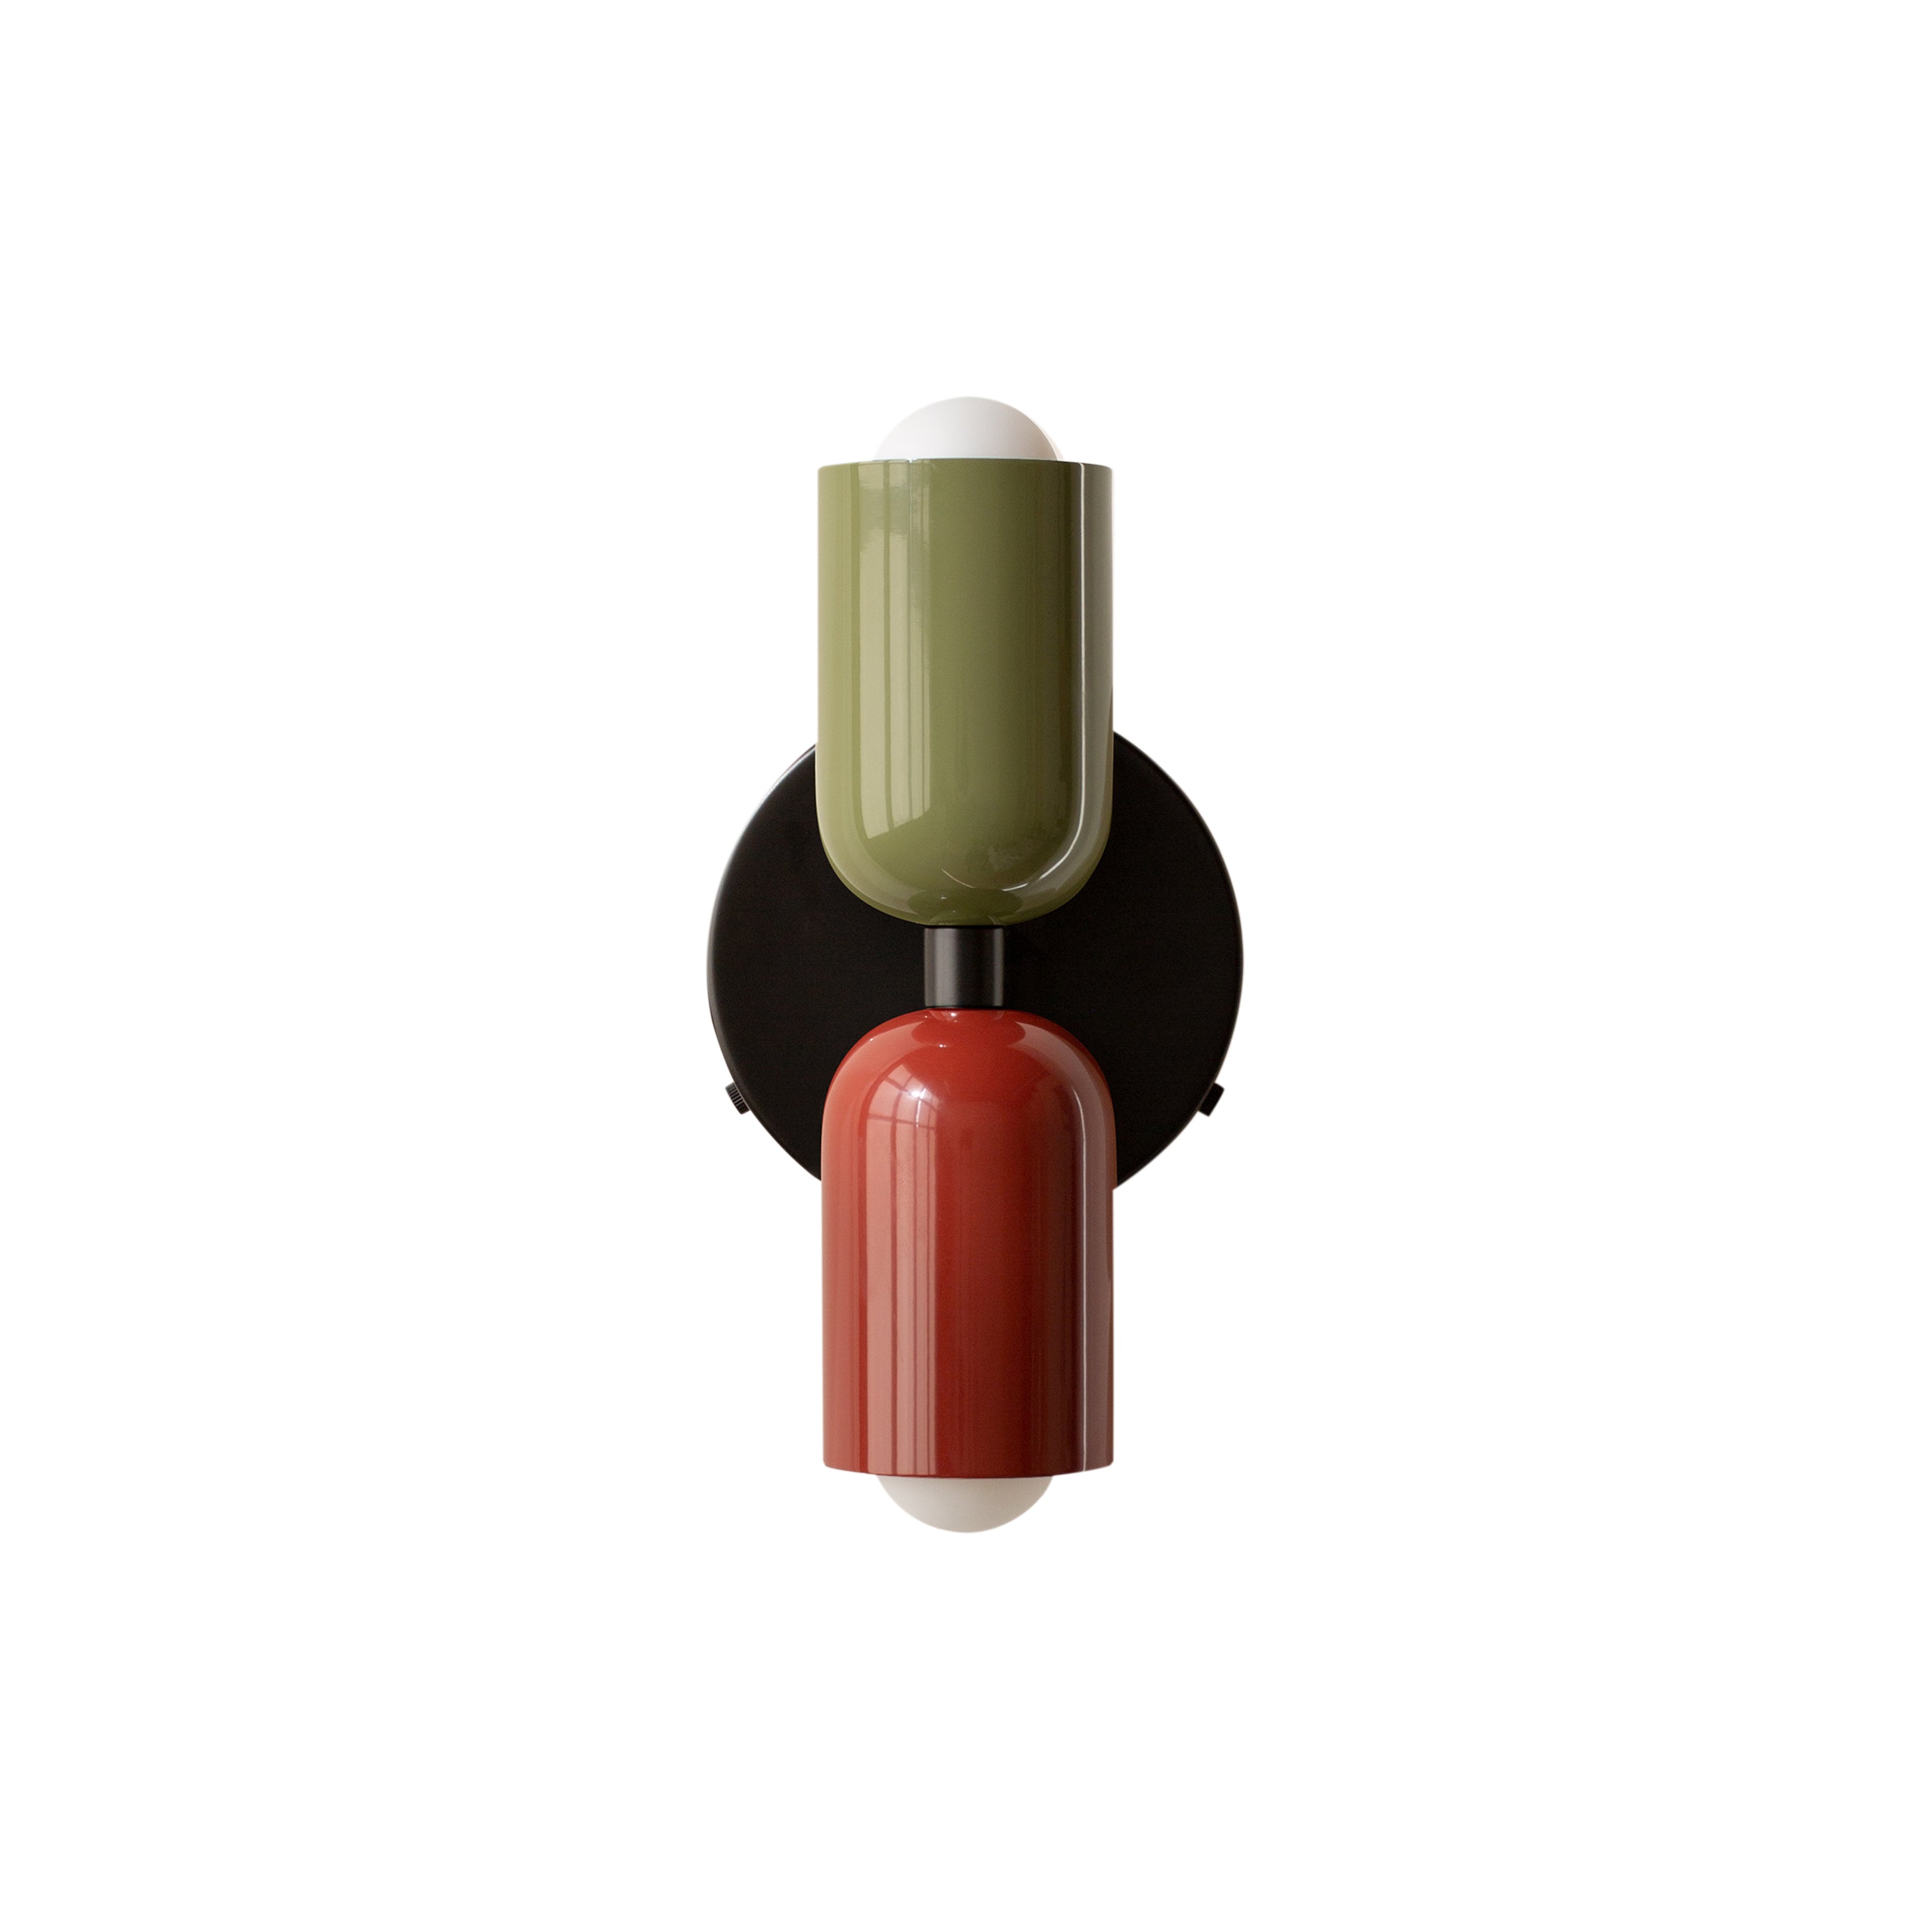 Up Down Sconce: Duo-Tone + Reed Green + Oxide Red + Hardwire